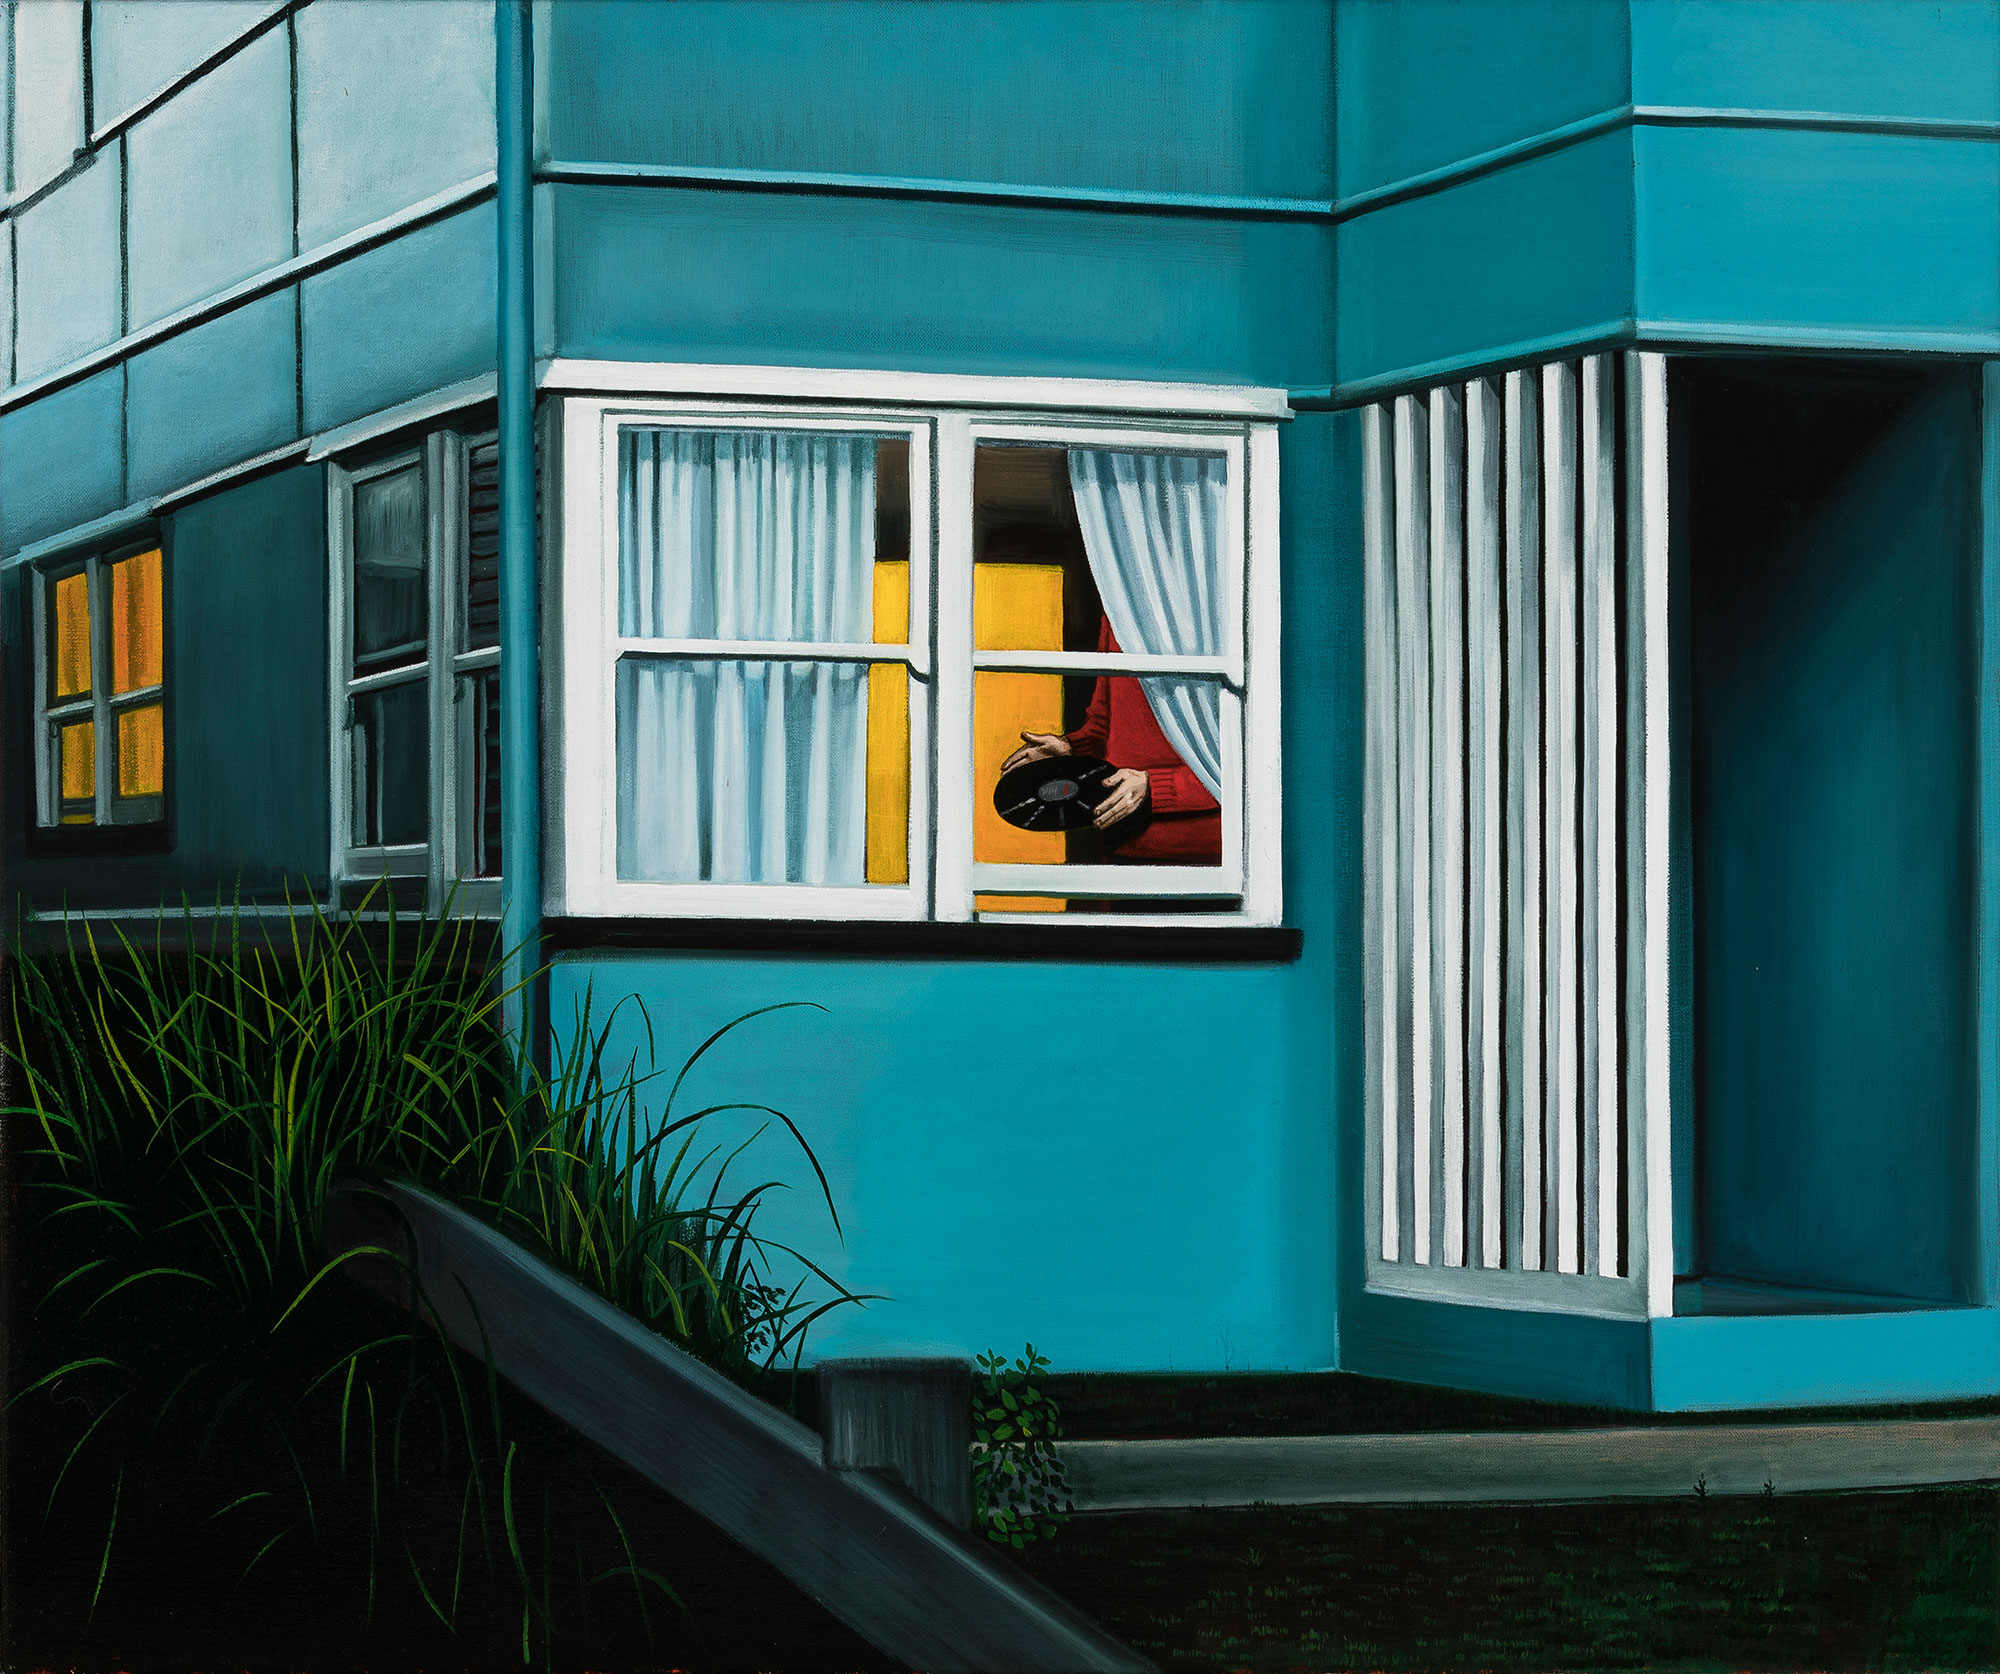 Anne WALLACE 'Dreaming of a Song' 2005 | oil on canvas | Collection of Proclaim, Melbourne